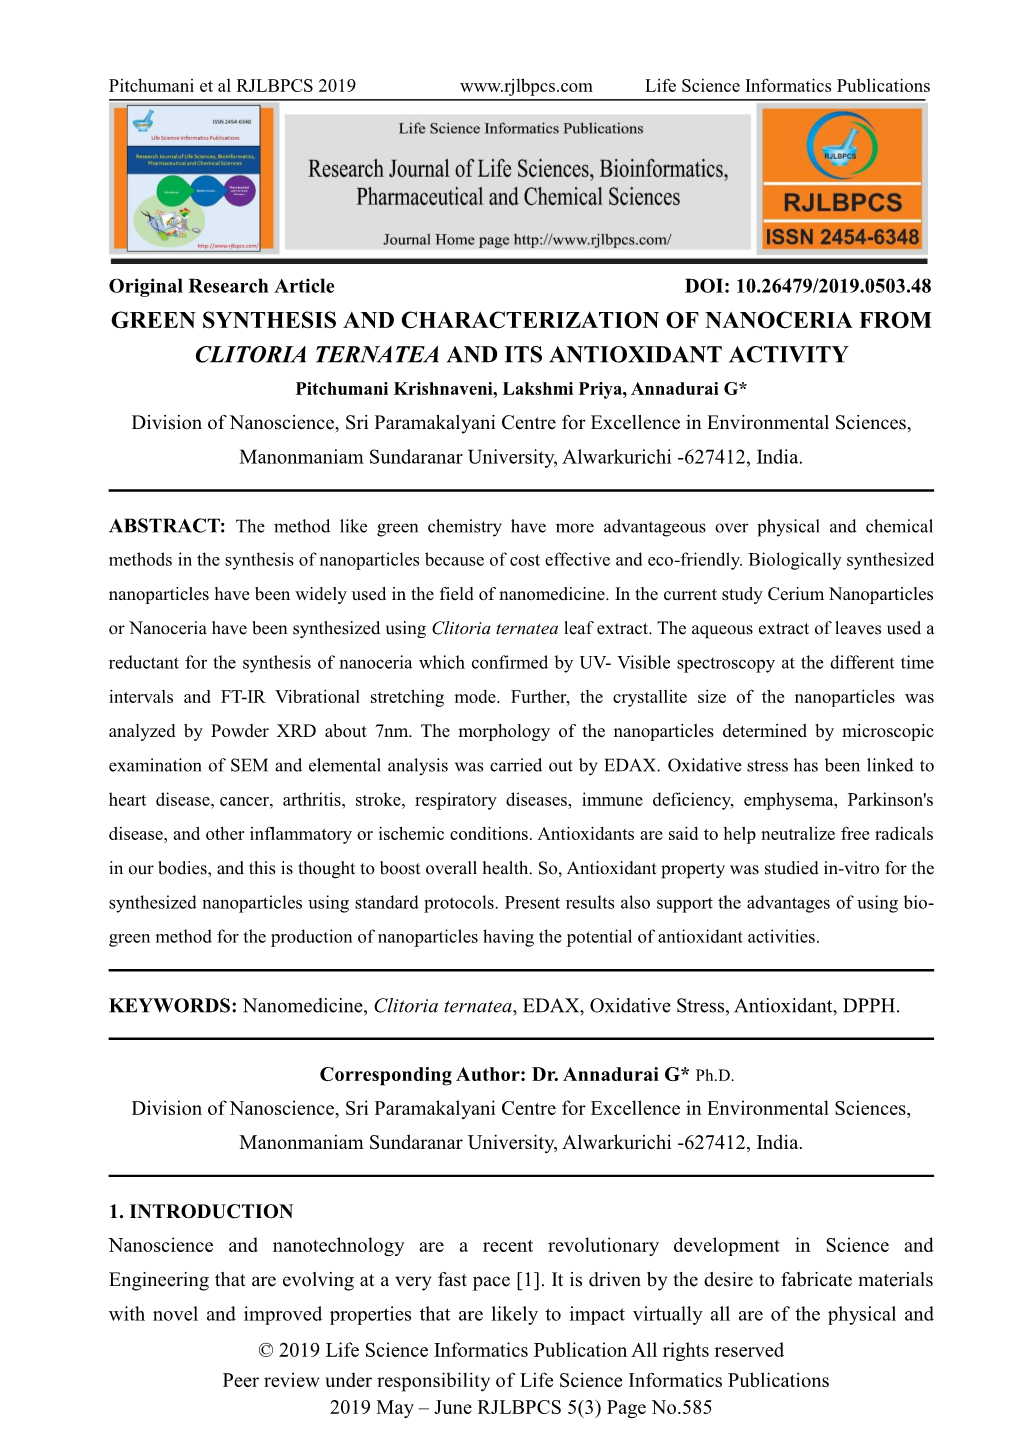 Green Synthesis and Characterization of Nanoceria from Clitoria Ternatea and Its Antioxidant Activity